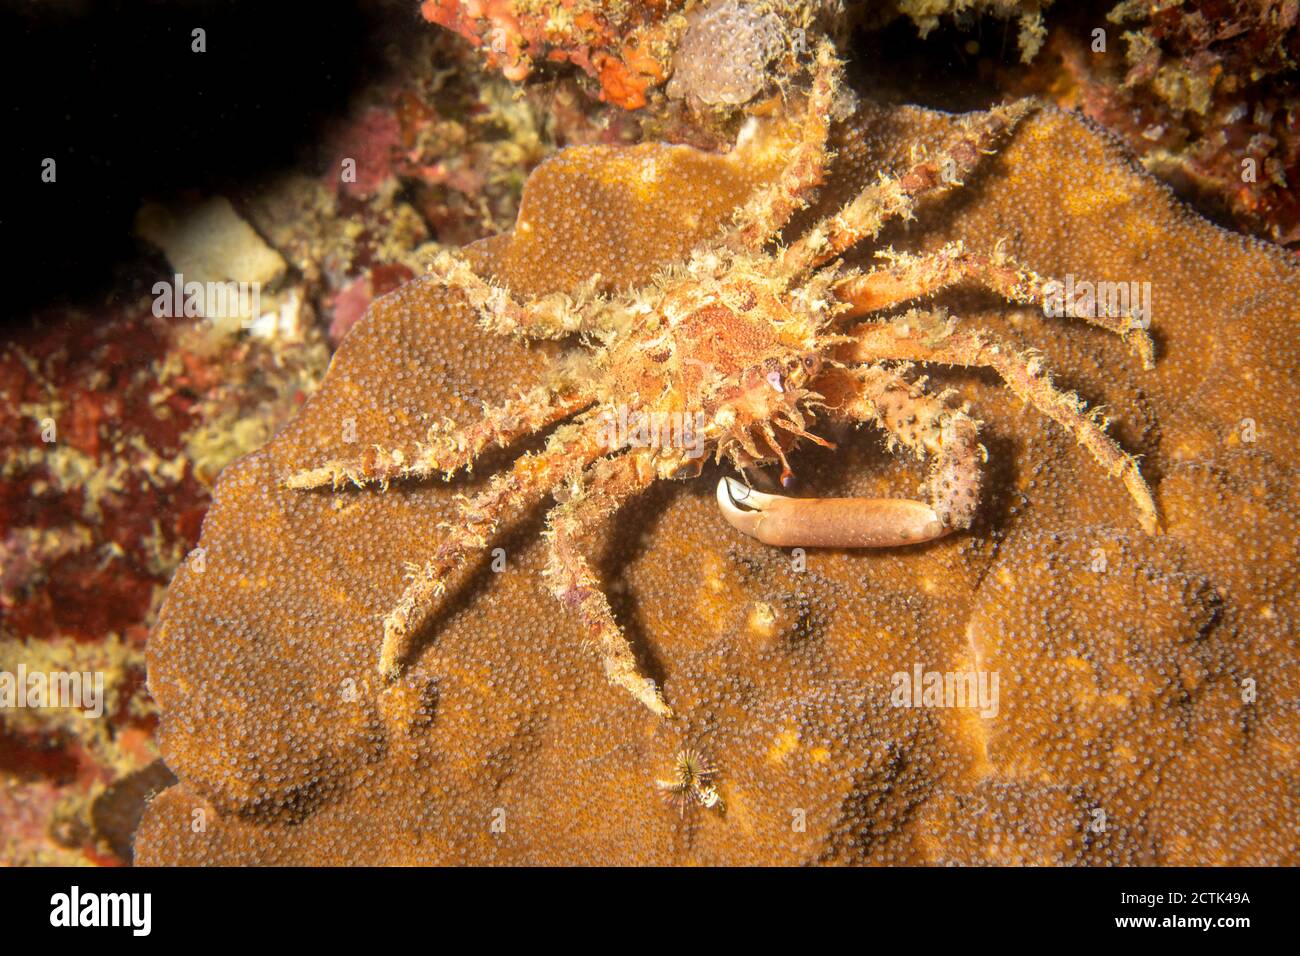 The pronghorn decorator crab, Schizophrys dama, is part of the group known as spider crabs, Philippines. Stock Photo